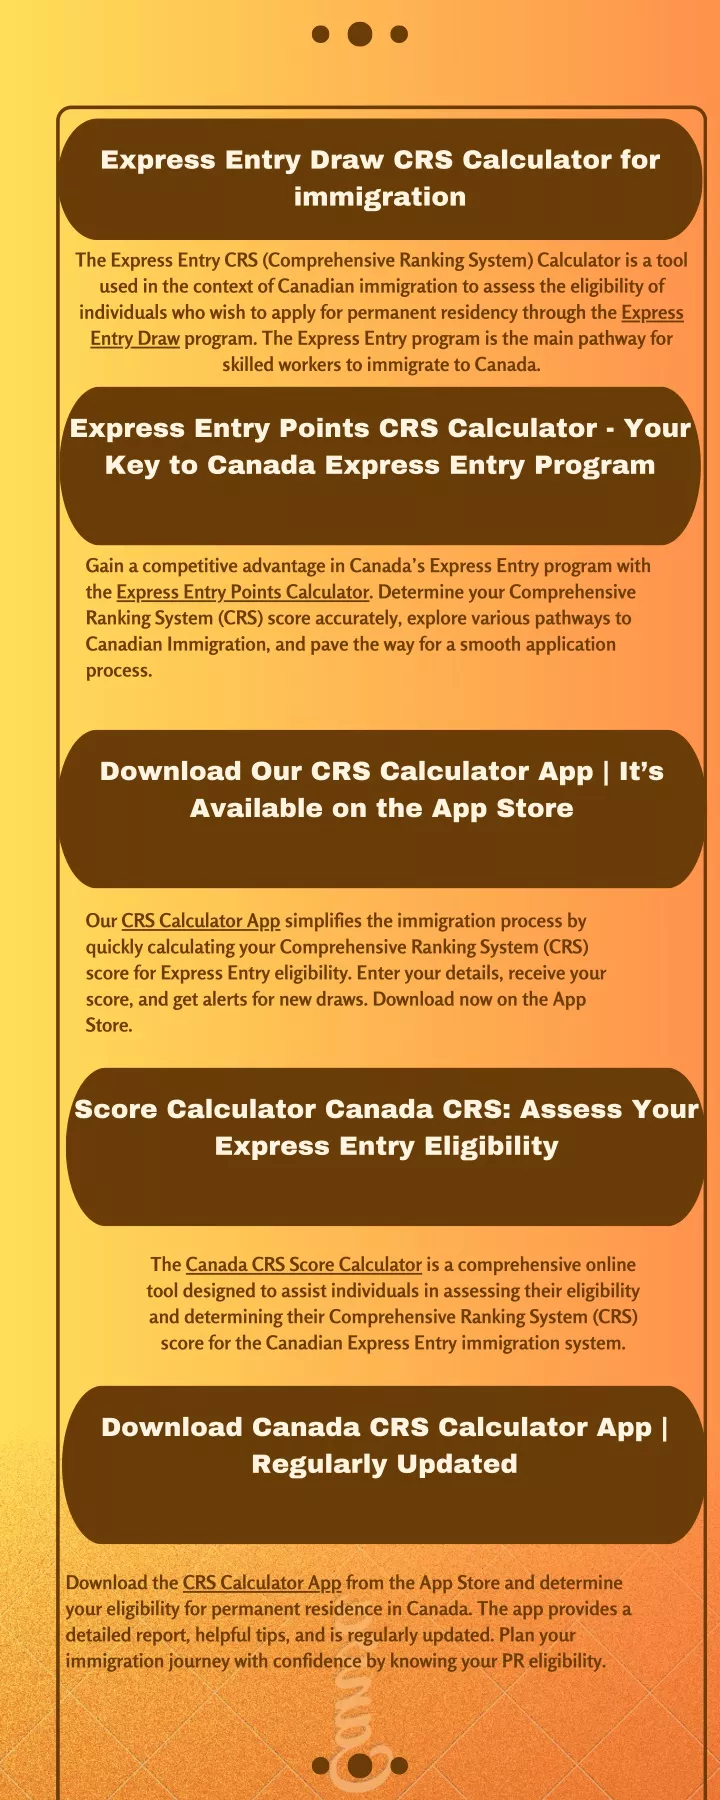 express entry draw crs calculator for immigration